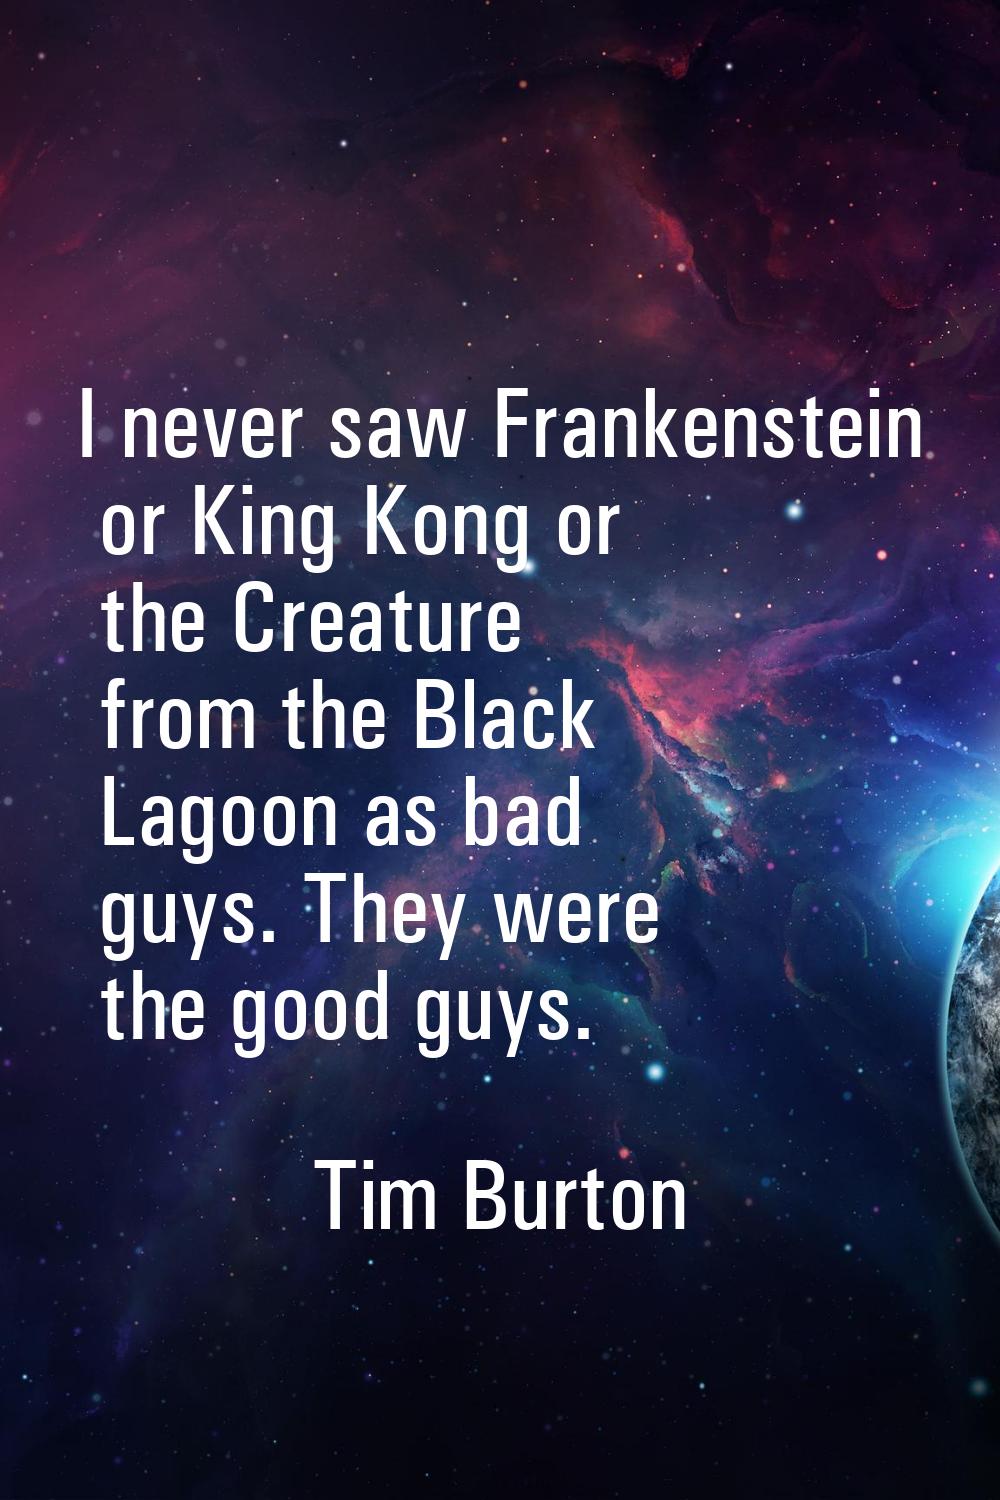 I never saw Frankenstein or King Kong or the Creature from the Black Lagoon as bad guys. They were 